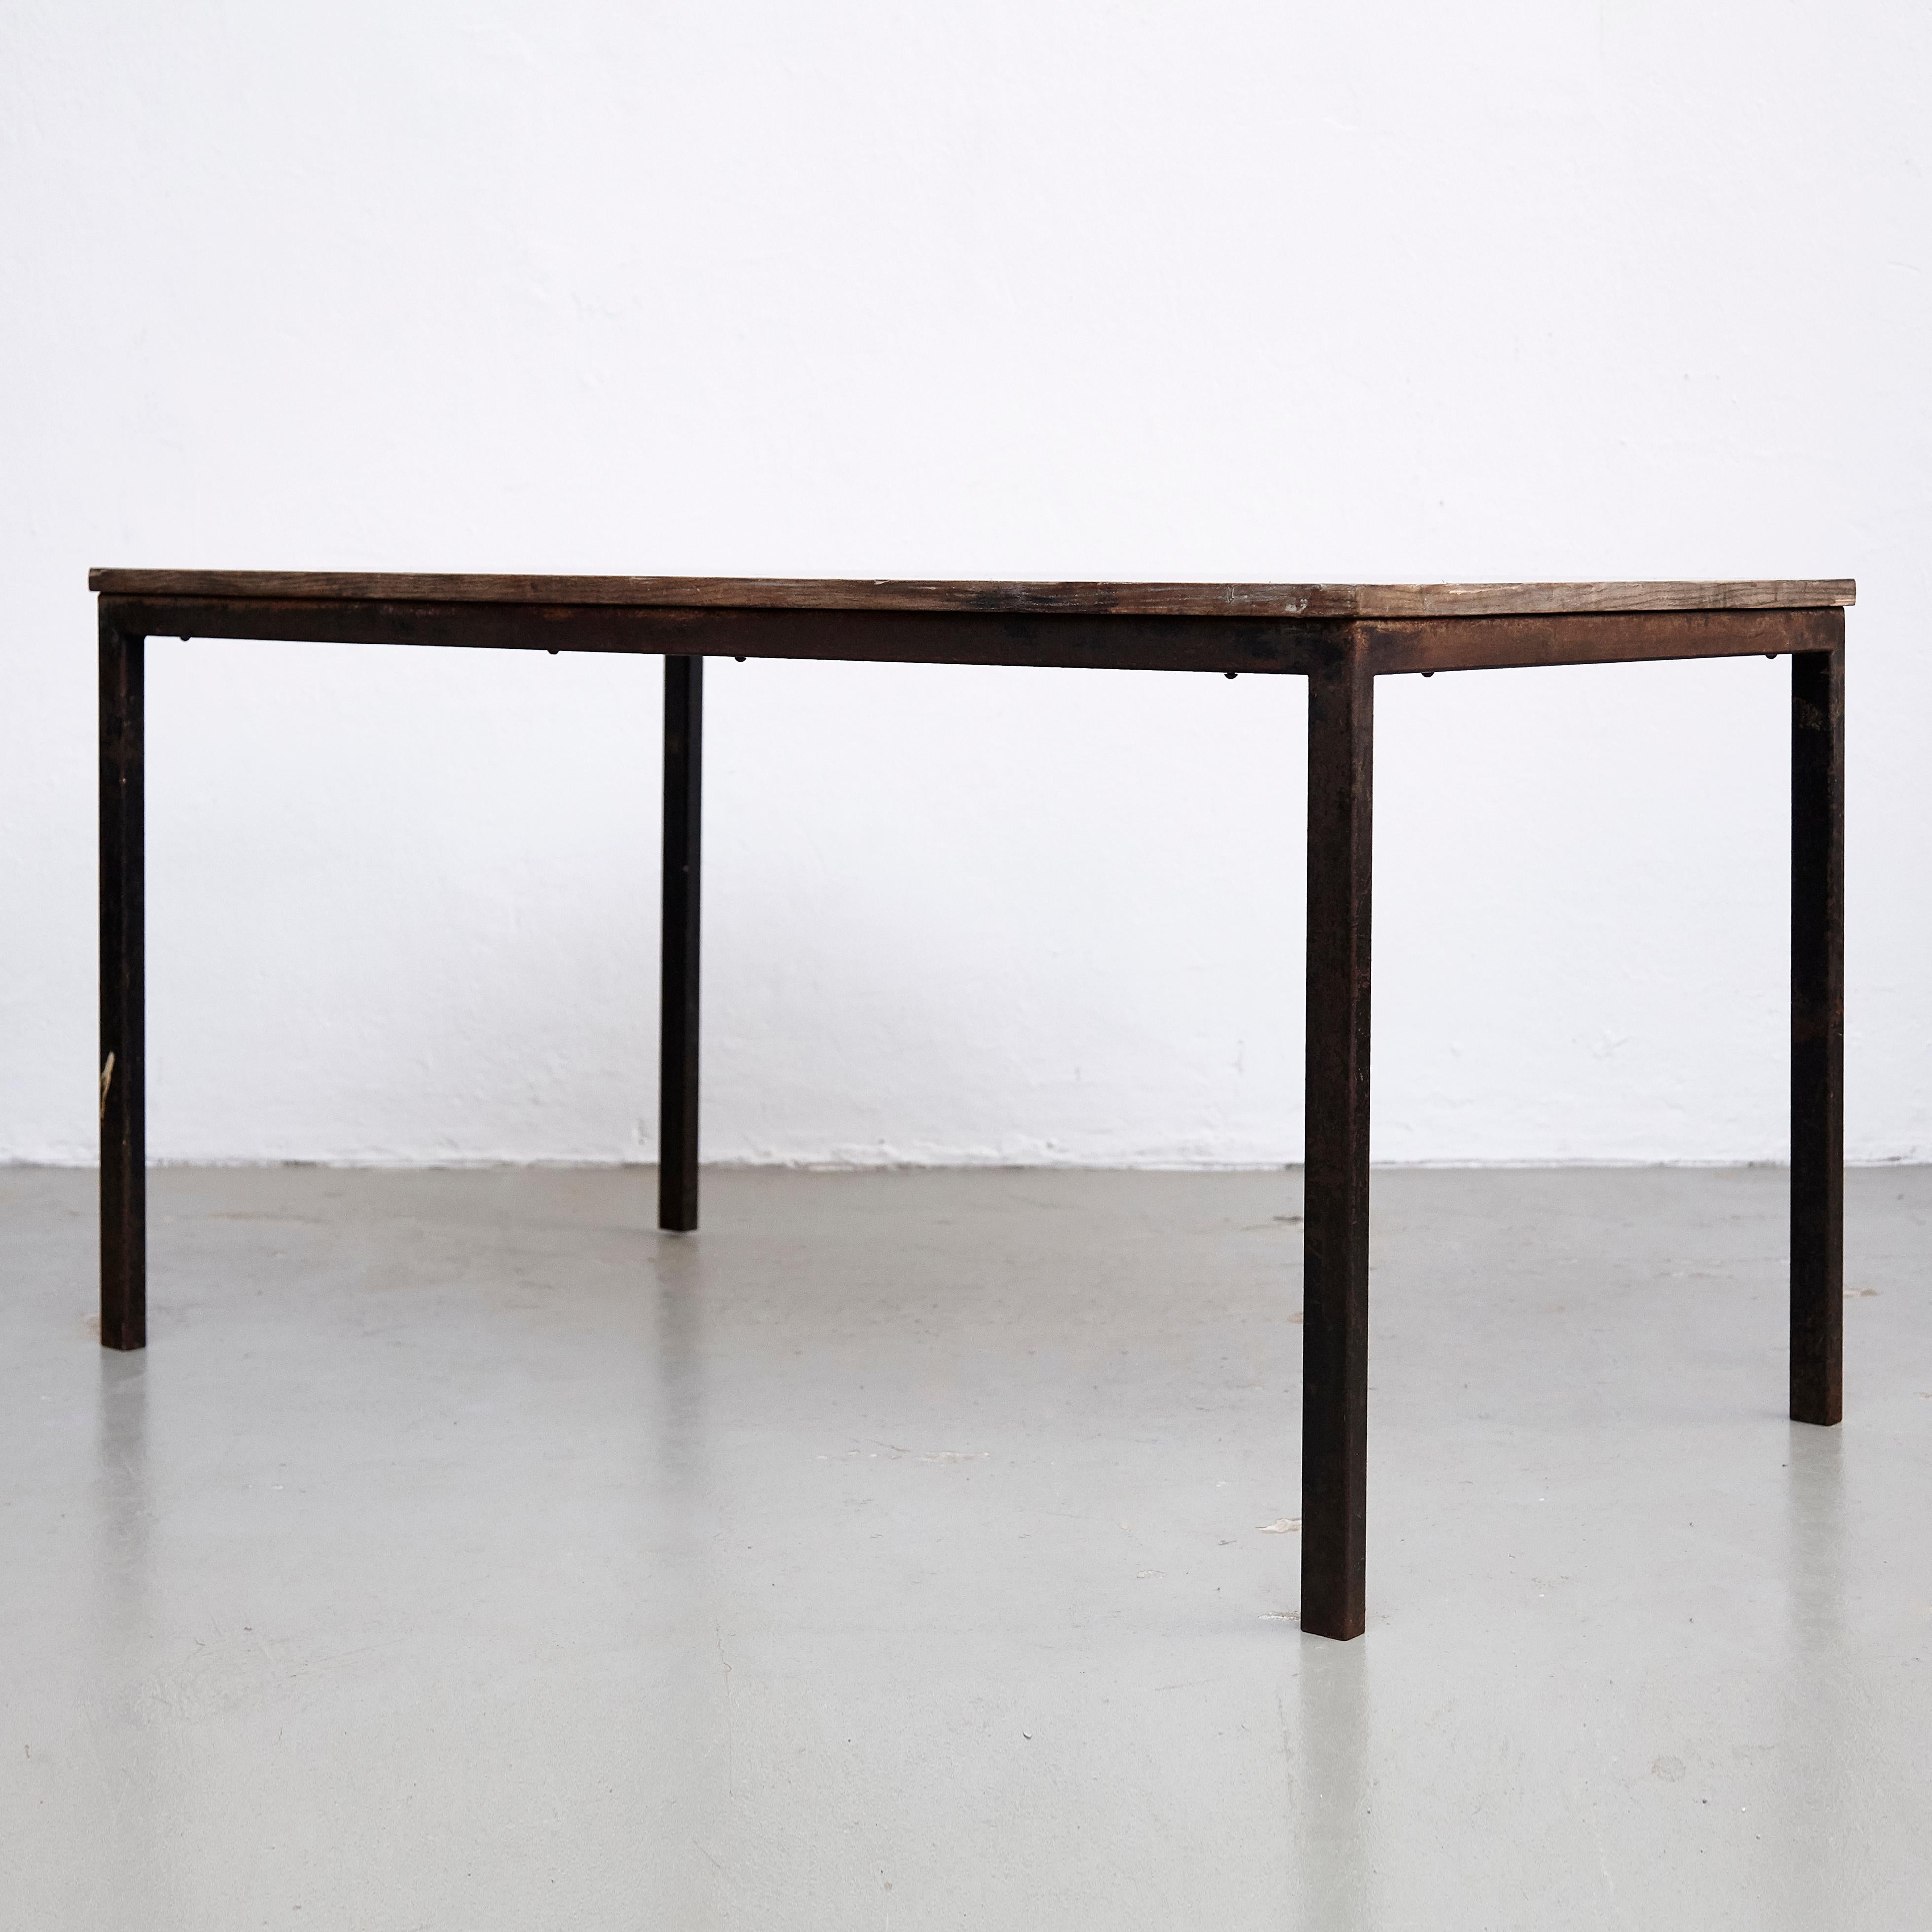 French Charlotte Perriand, Mid Century Modern, Wood Metal Cansado Table, circa 1950